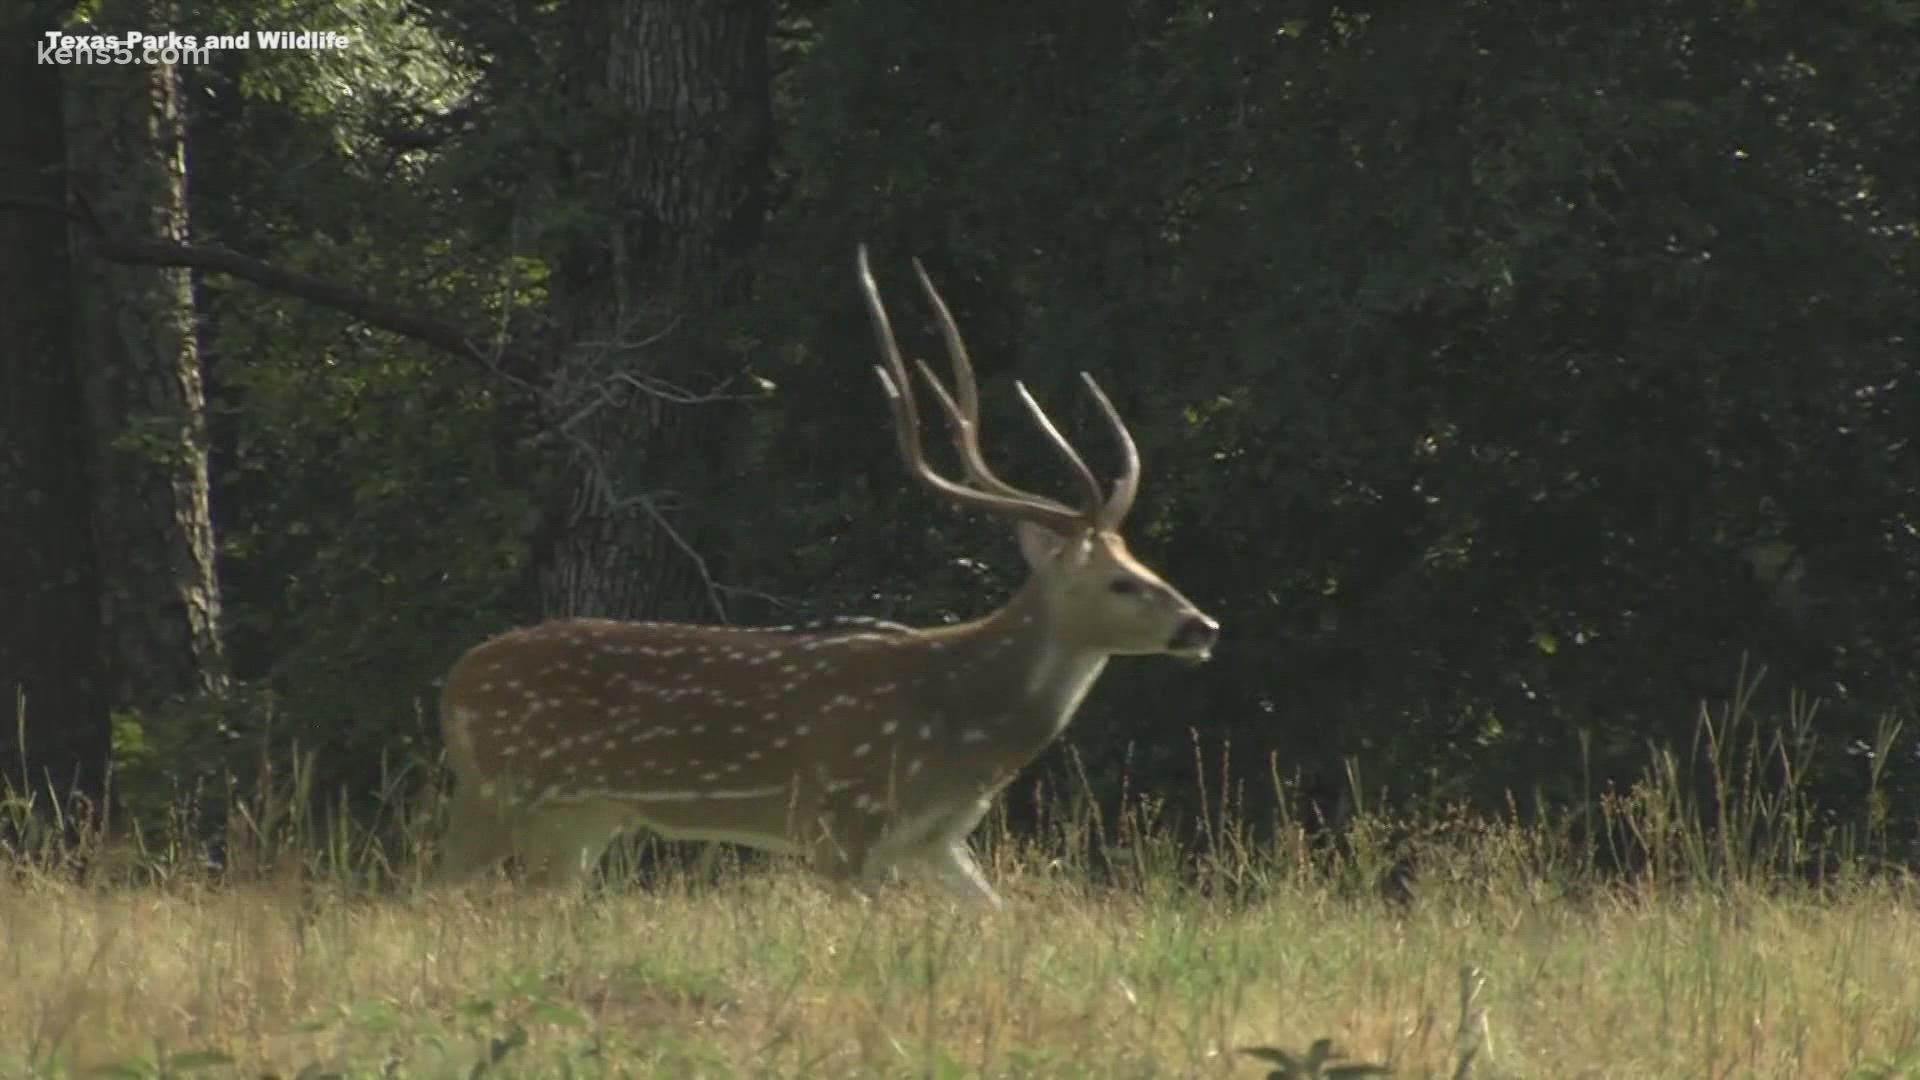 Some lucky Texans are getting the chance to hunt in parts of the state that are totally unspoiled!